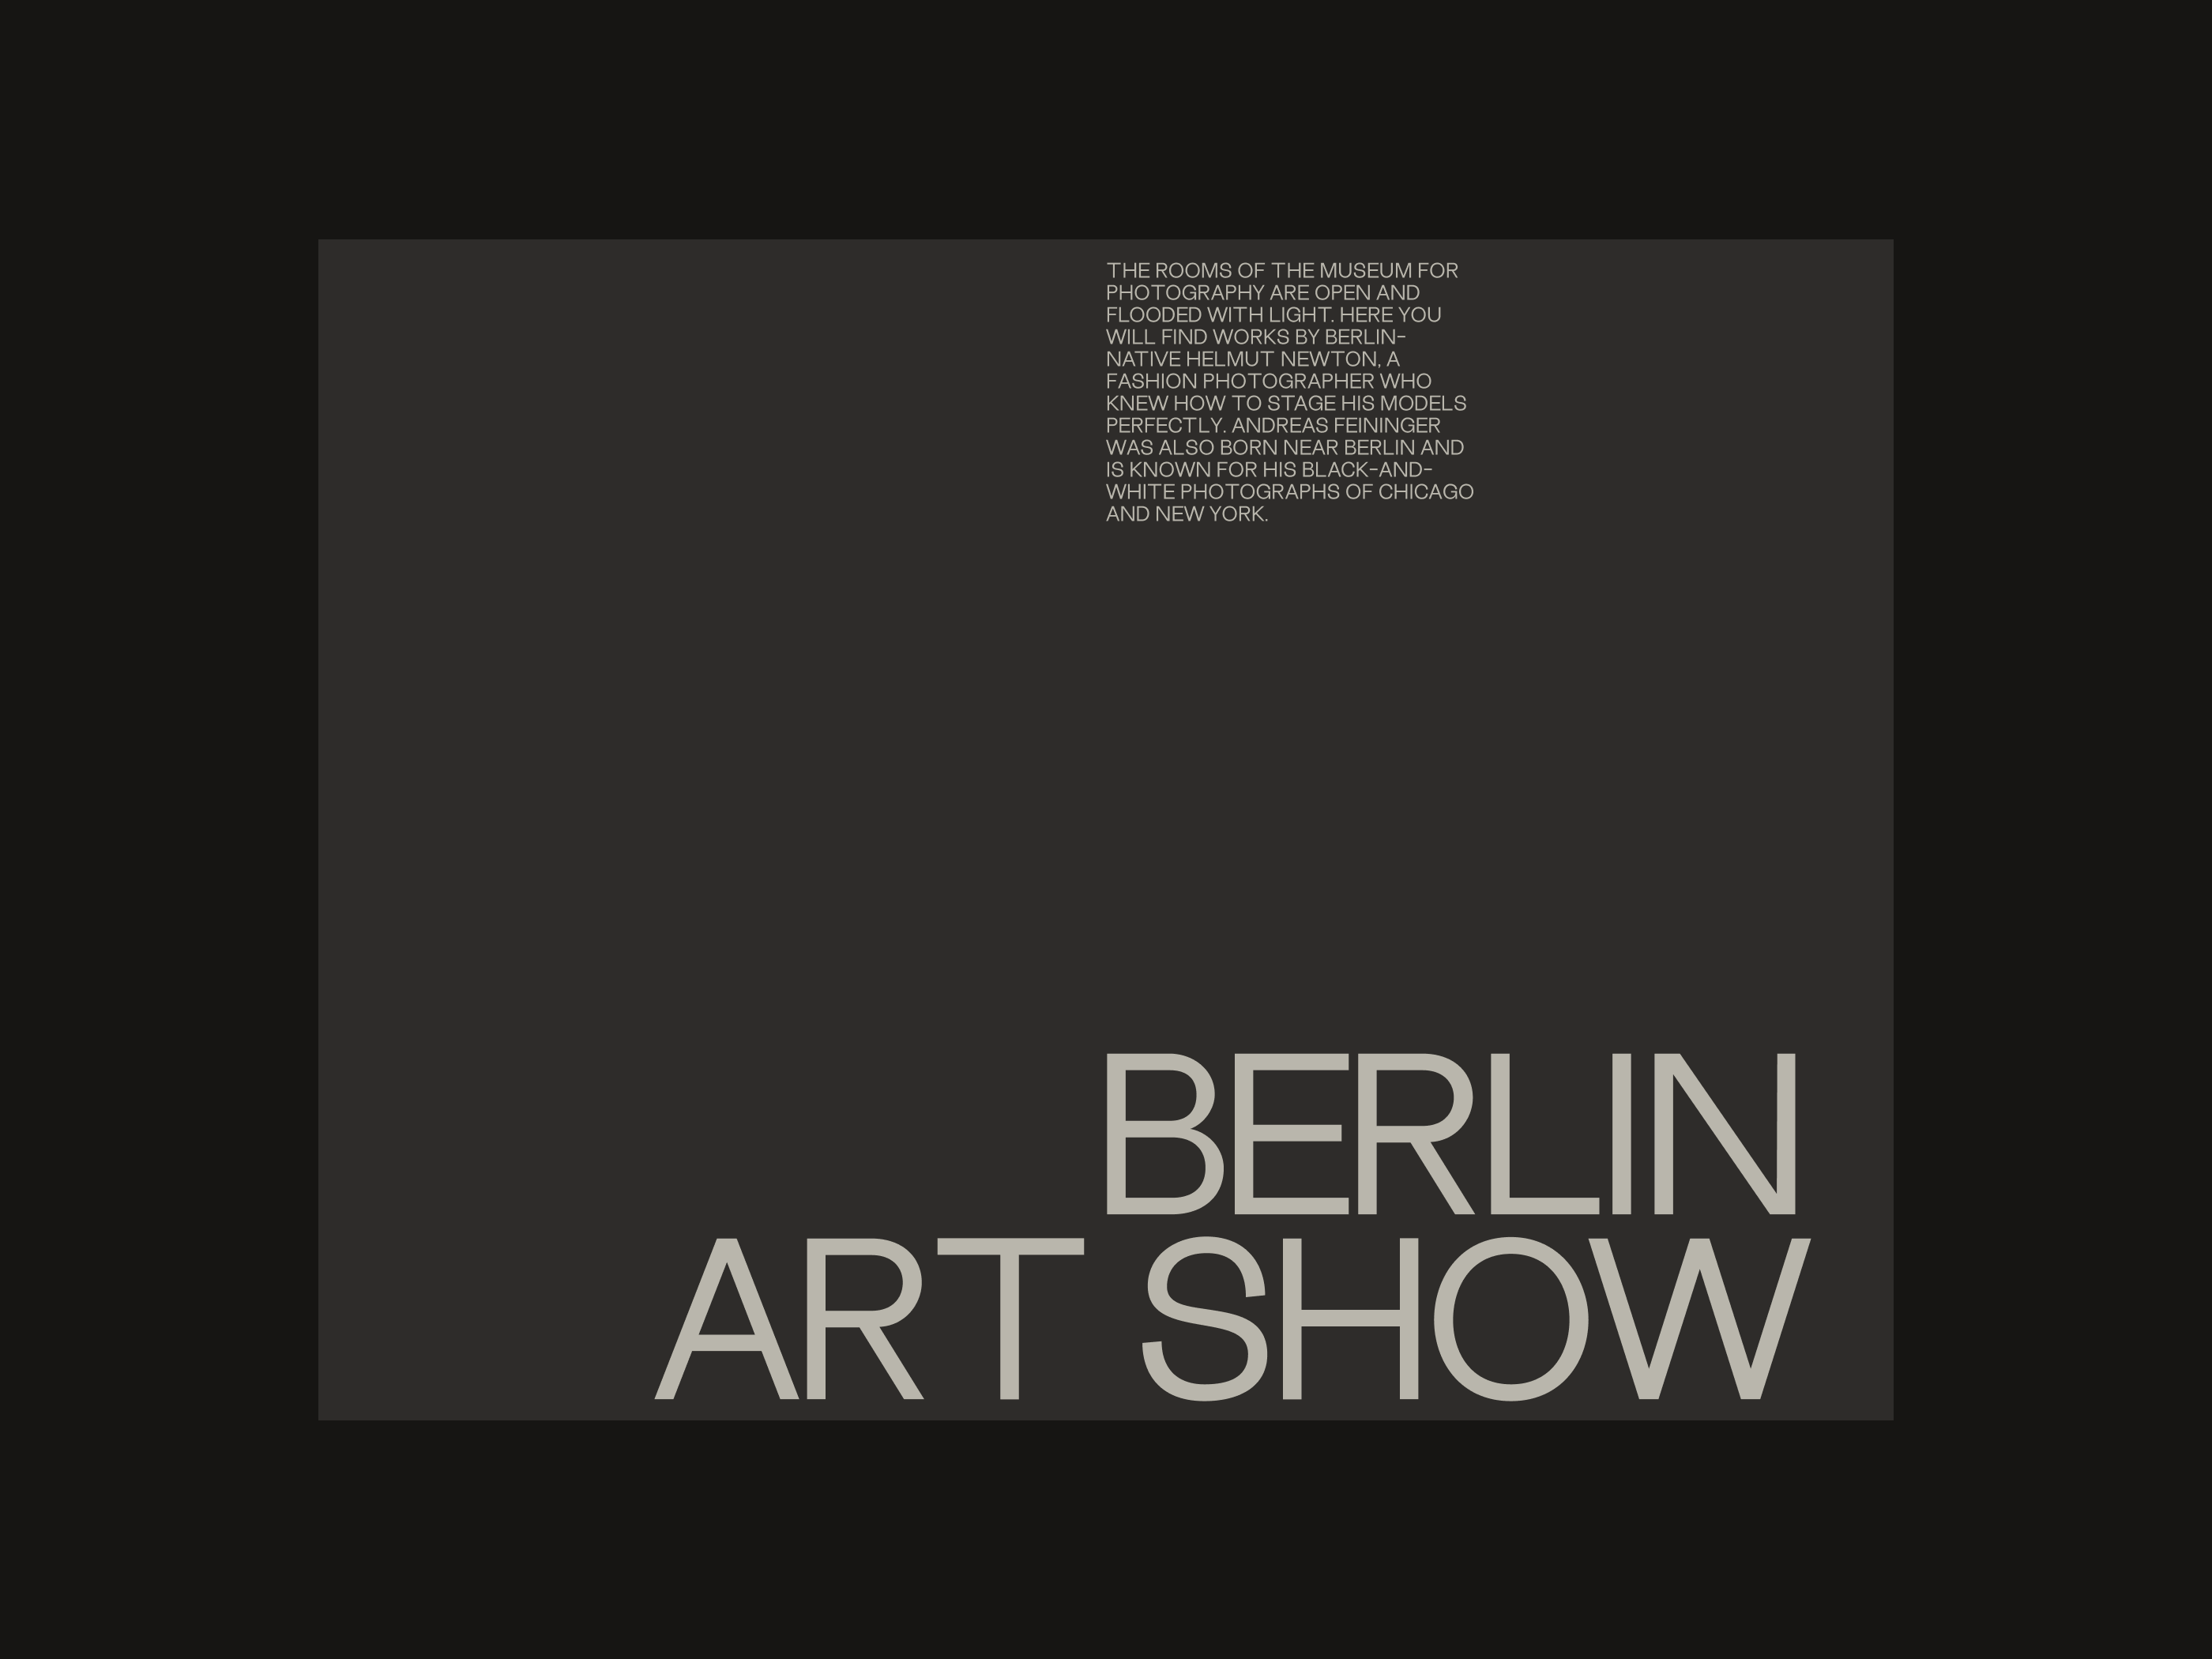 Berlin Art Show | Concept layout artdirection composition layout type typography